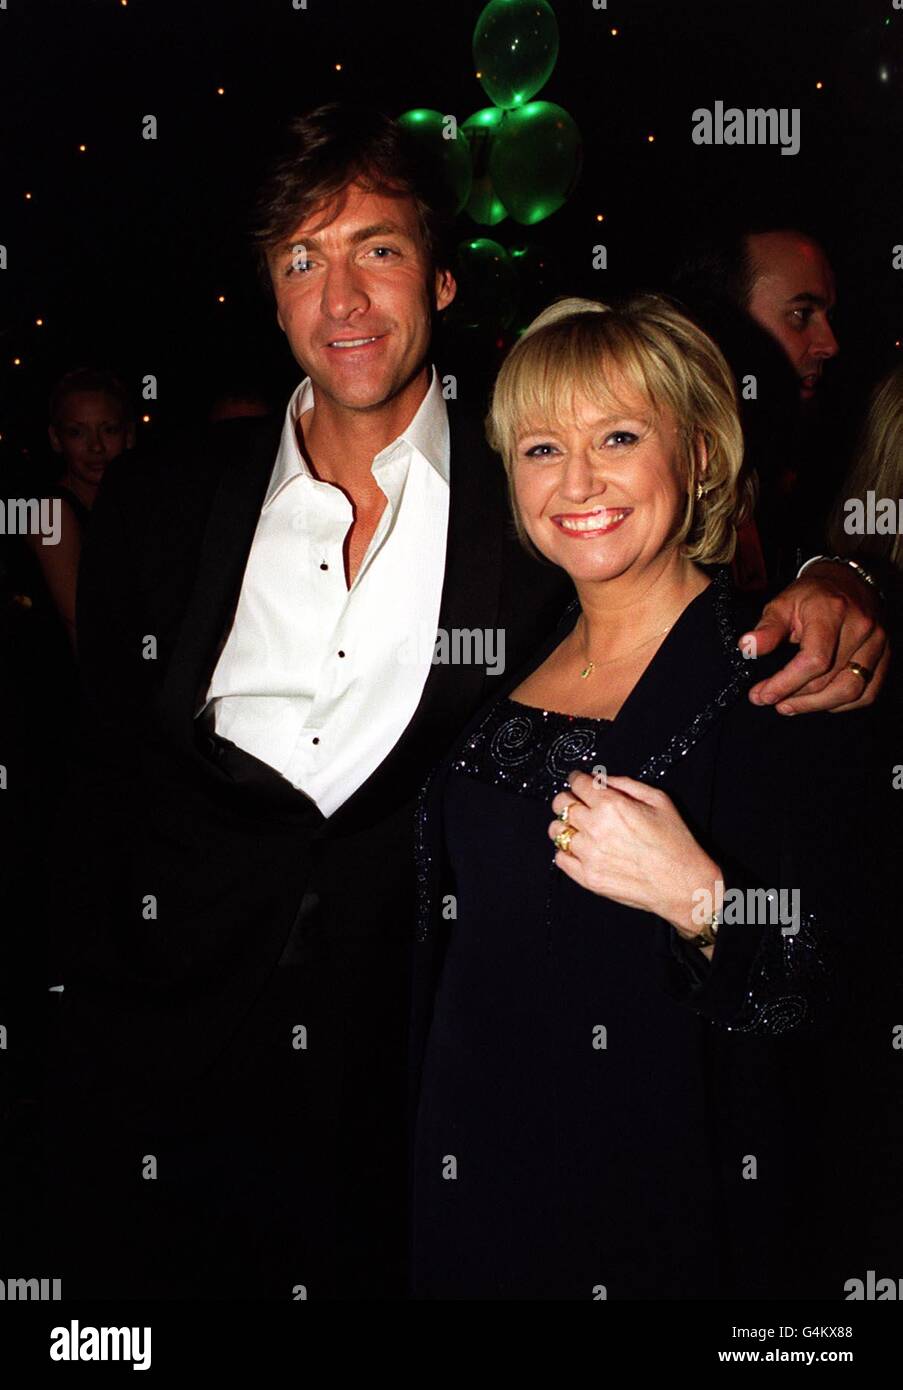 Richard Madeley And Judy Finnigan Who Present The Tv Show This Morning Attending The Whats On